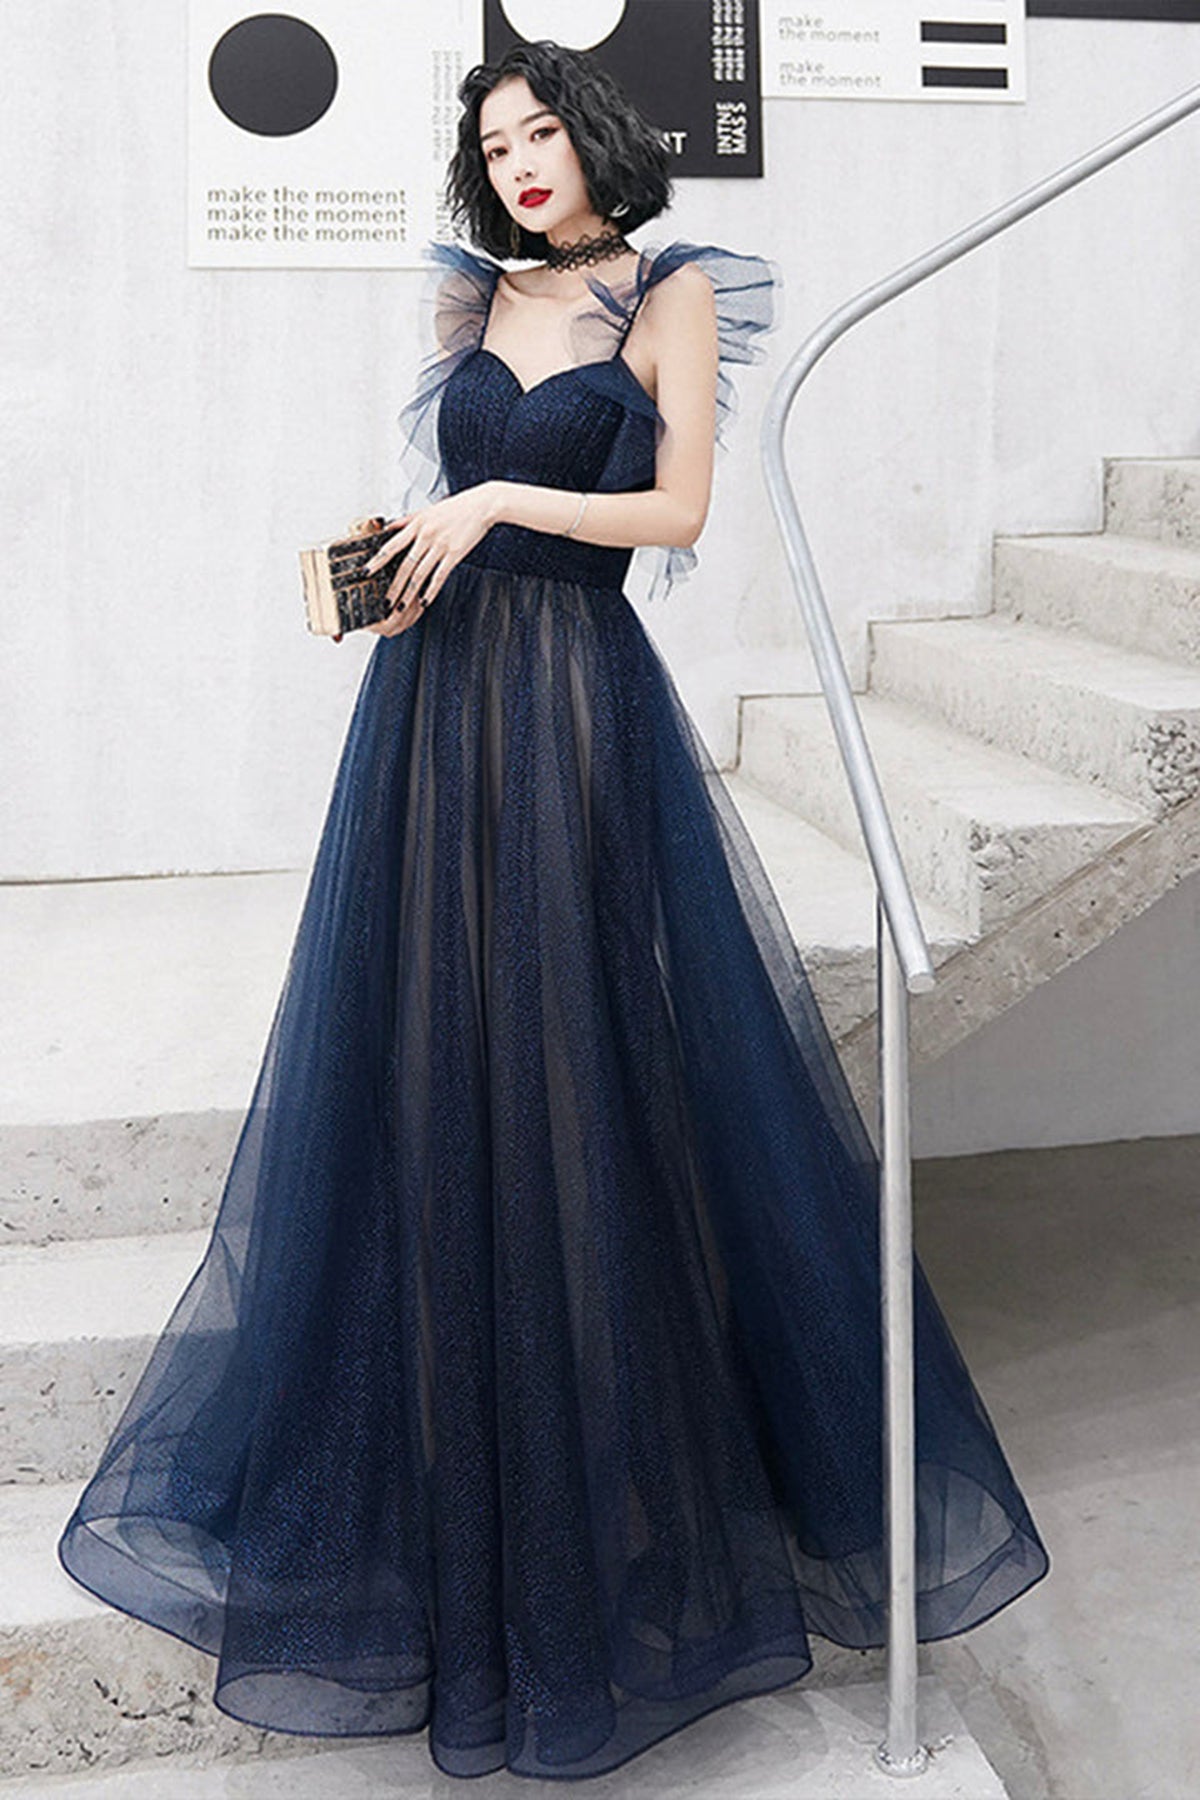 Navy Blue Tulle A Line Long Prom Dresses, Blue Tulle Formal Dresses, Long Navy Blue Evening Dresses WT1039